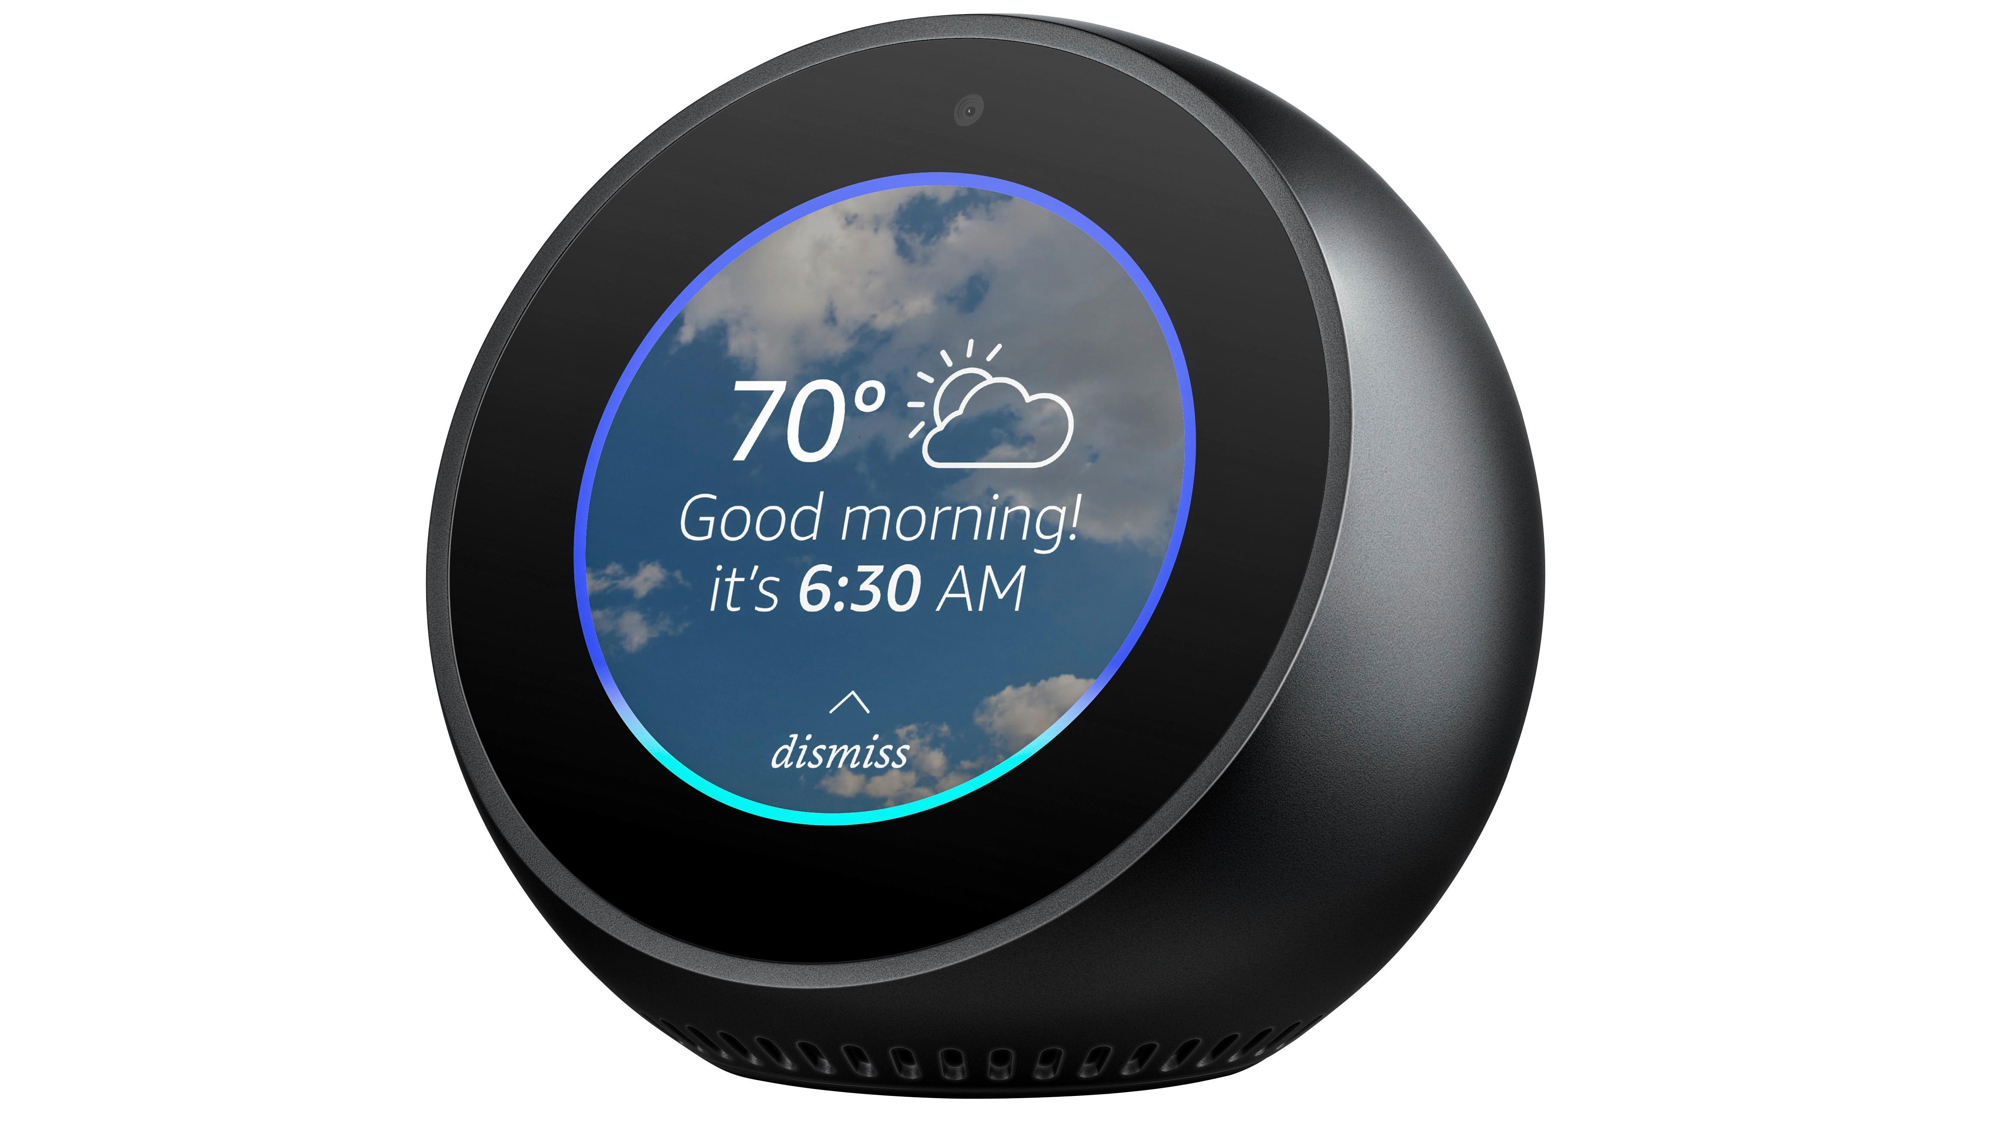 Amazon Echo Spot owners are 